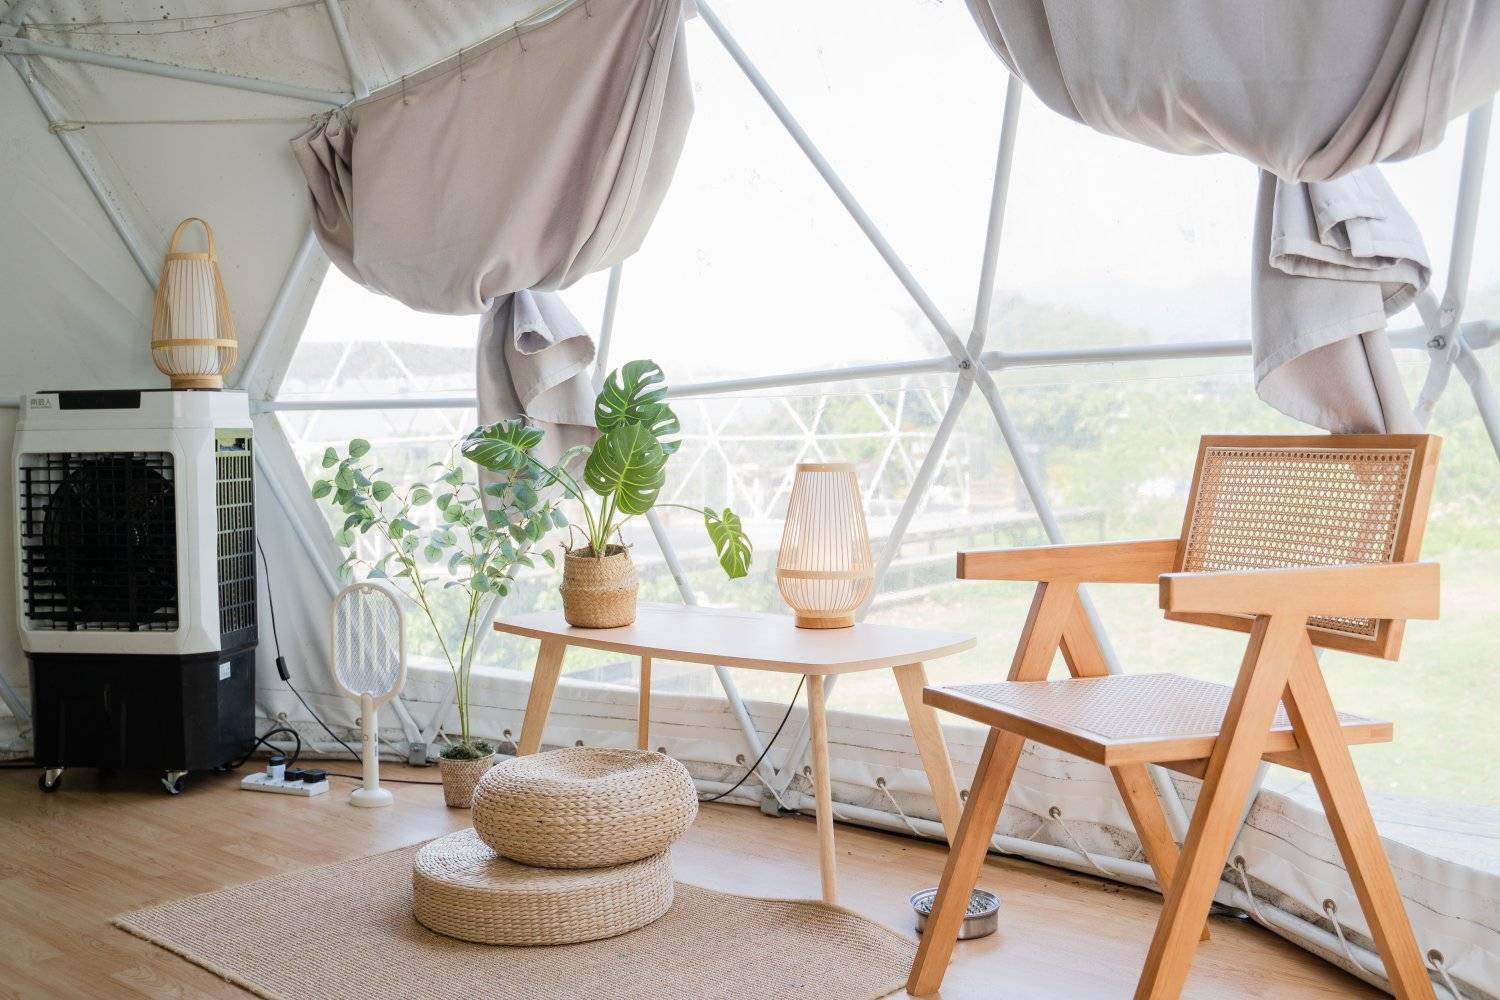 Nomad Terrace - Dome & Bell Tent & Glamping Tent 【Private Platform】 5M Dome Tent with DIY Buffet Breakfast (4 pax) - Zone D terraced area｜Nomad Terrance 8